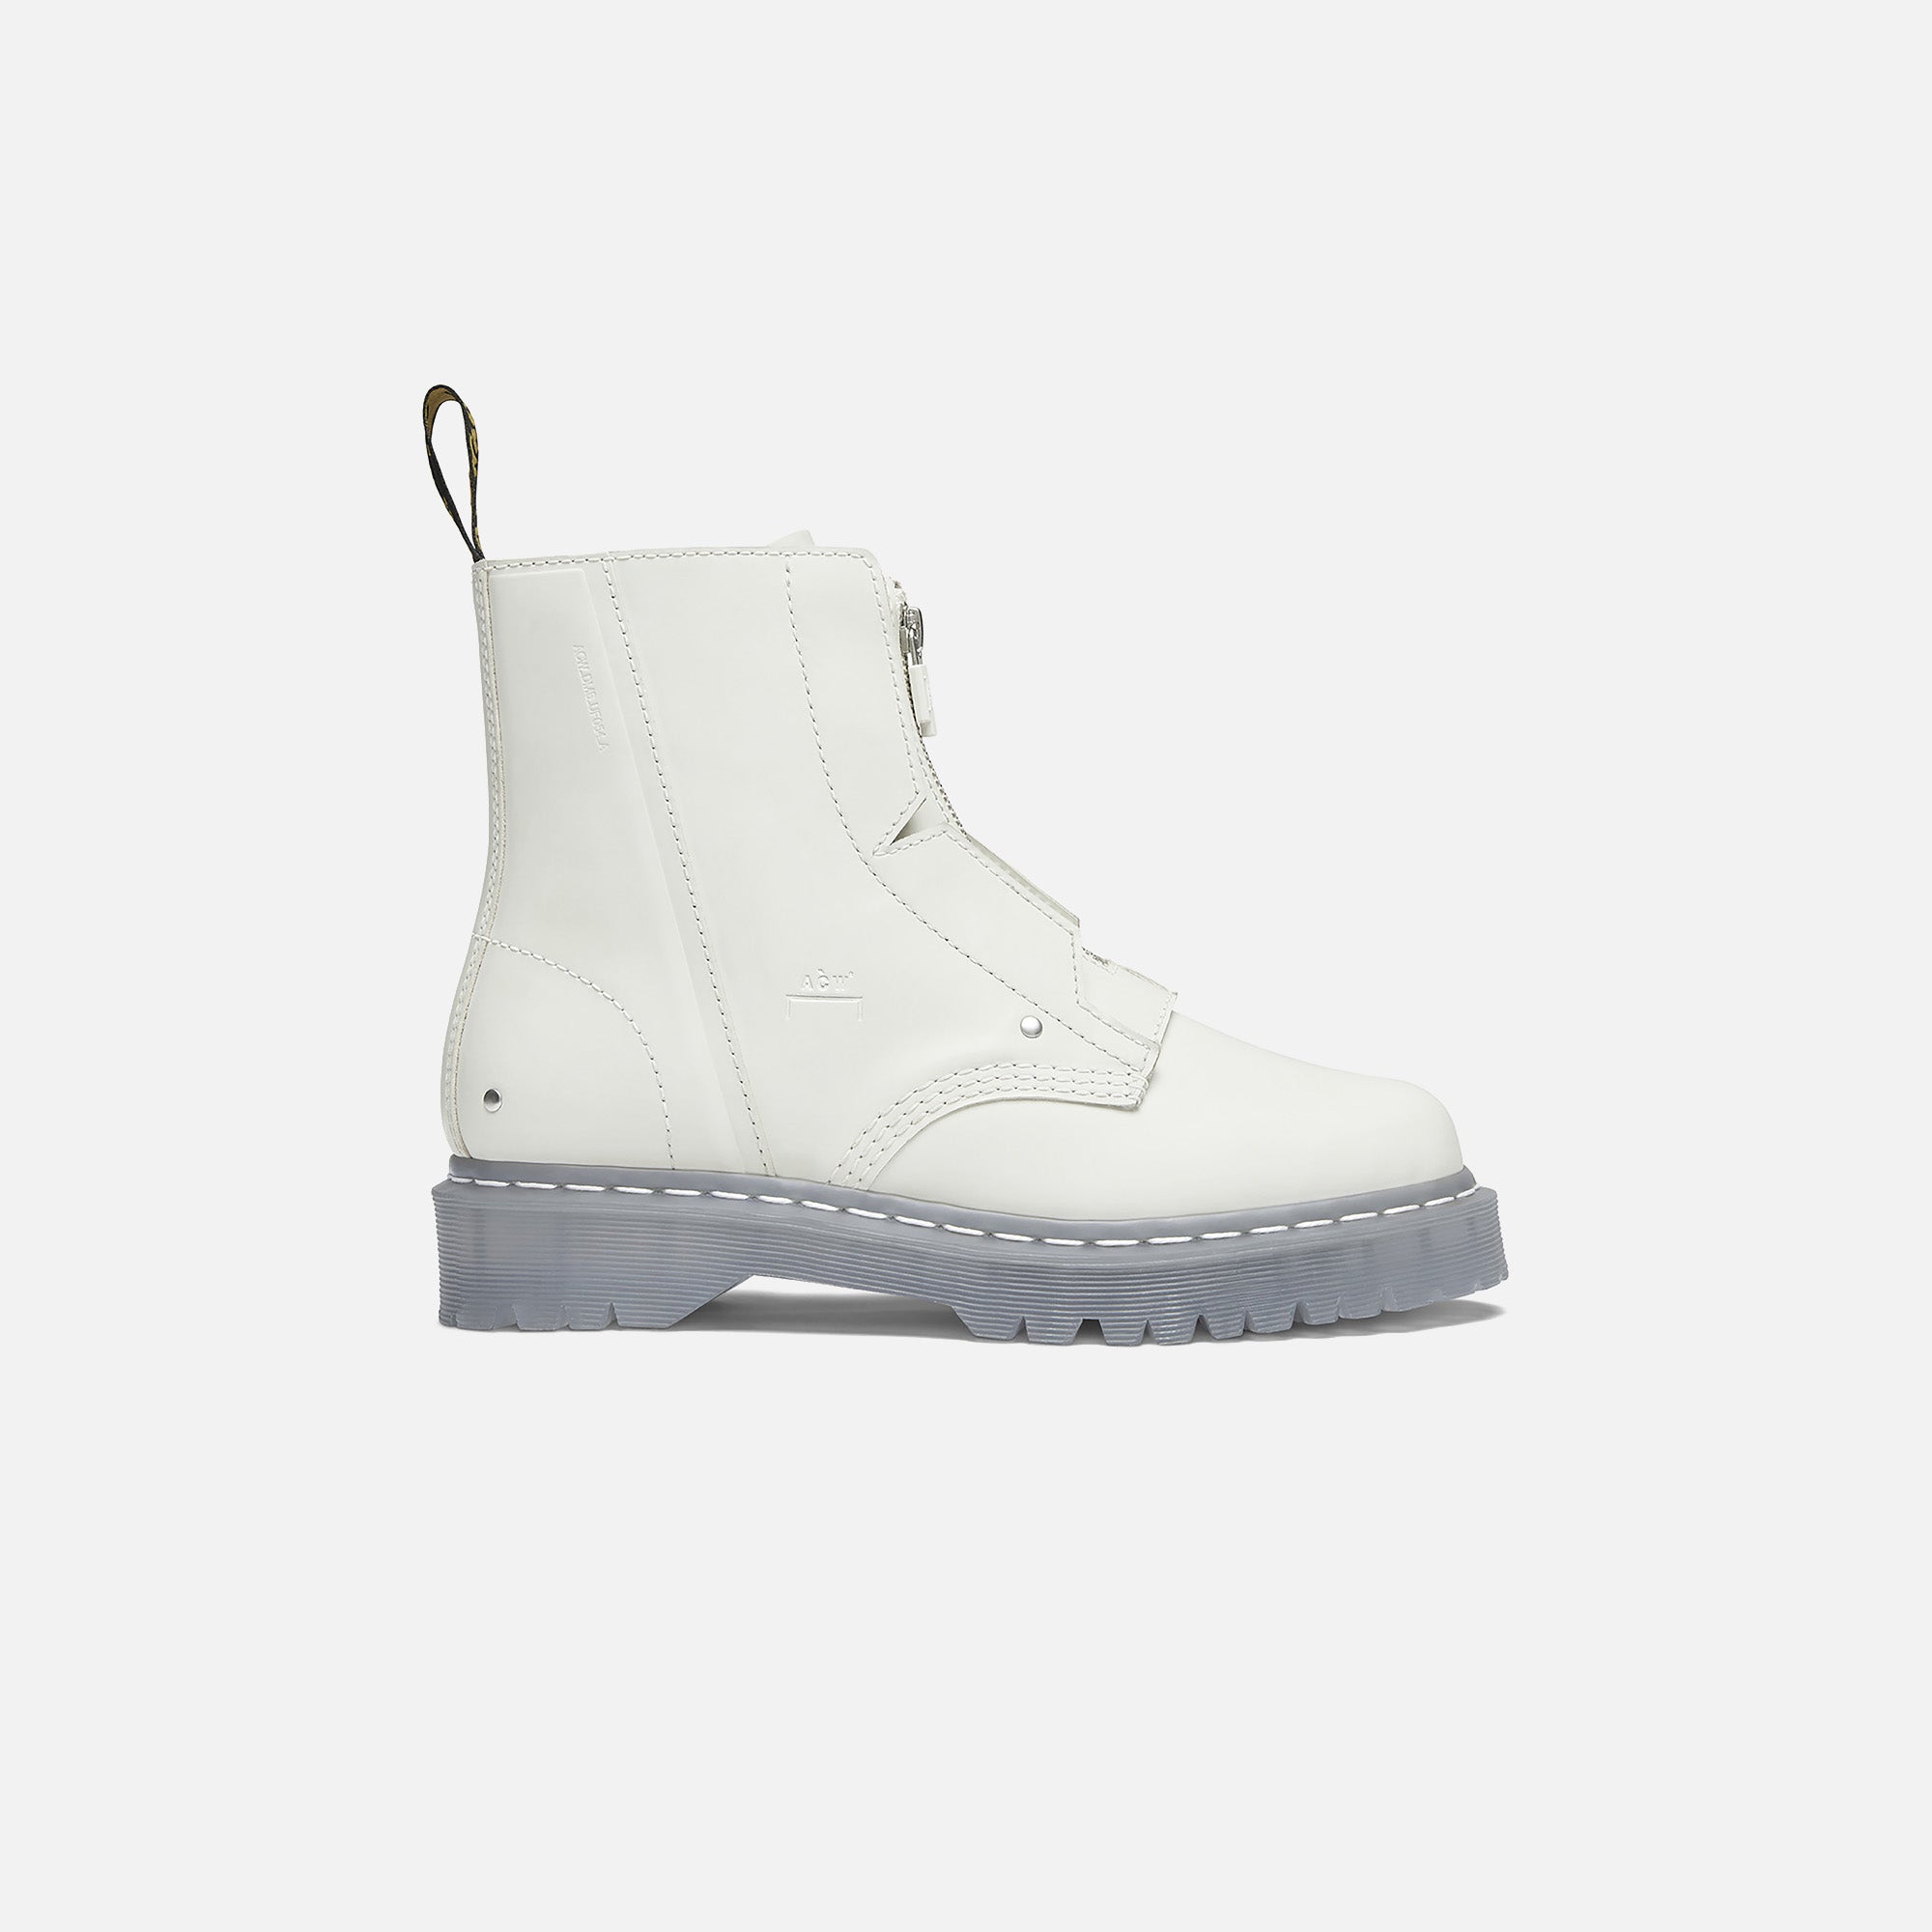 Dr. Martens x A-Cold-Wall* 1460 Bex High - Cream – Kith